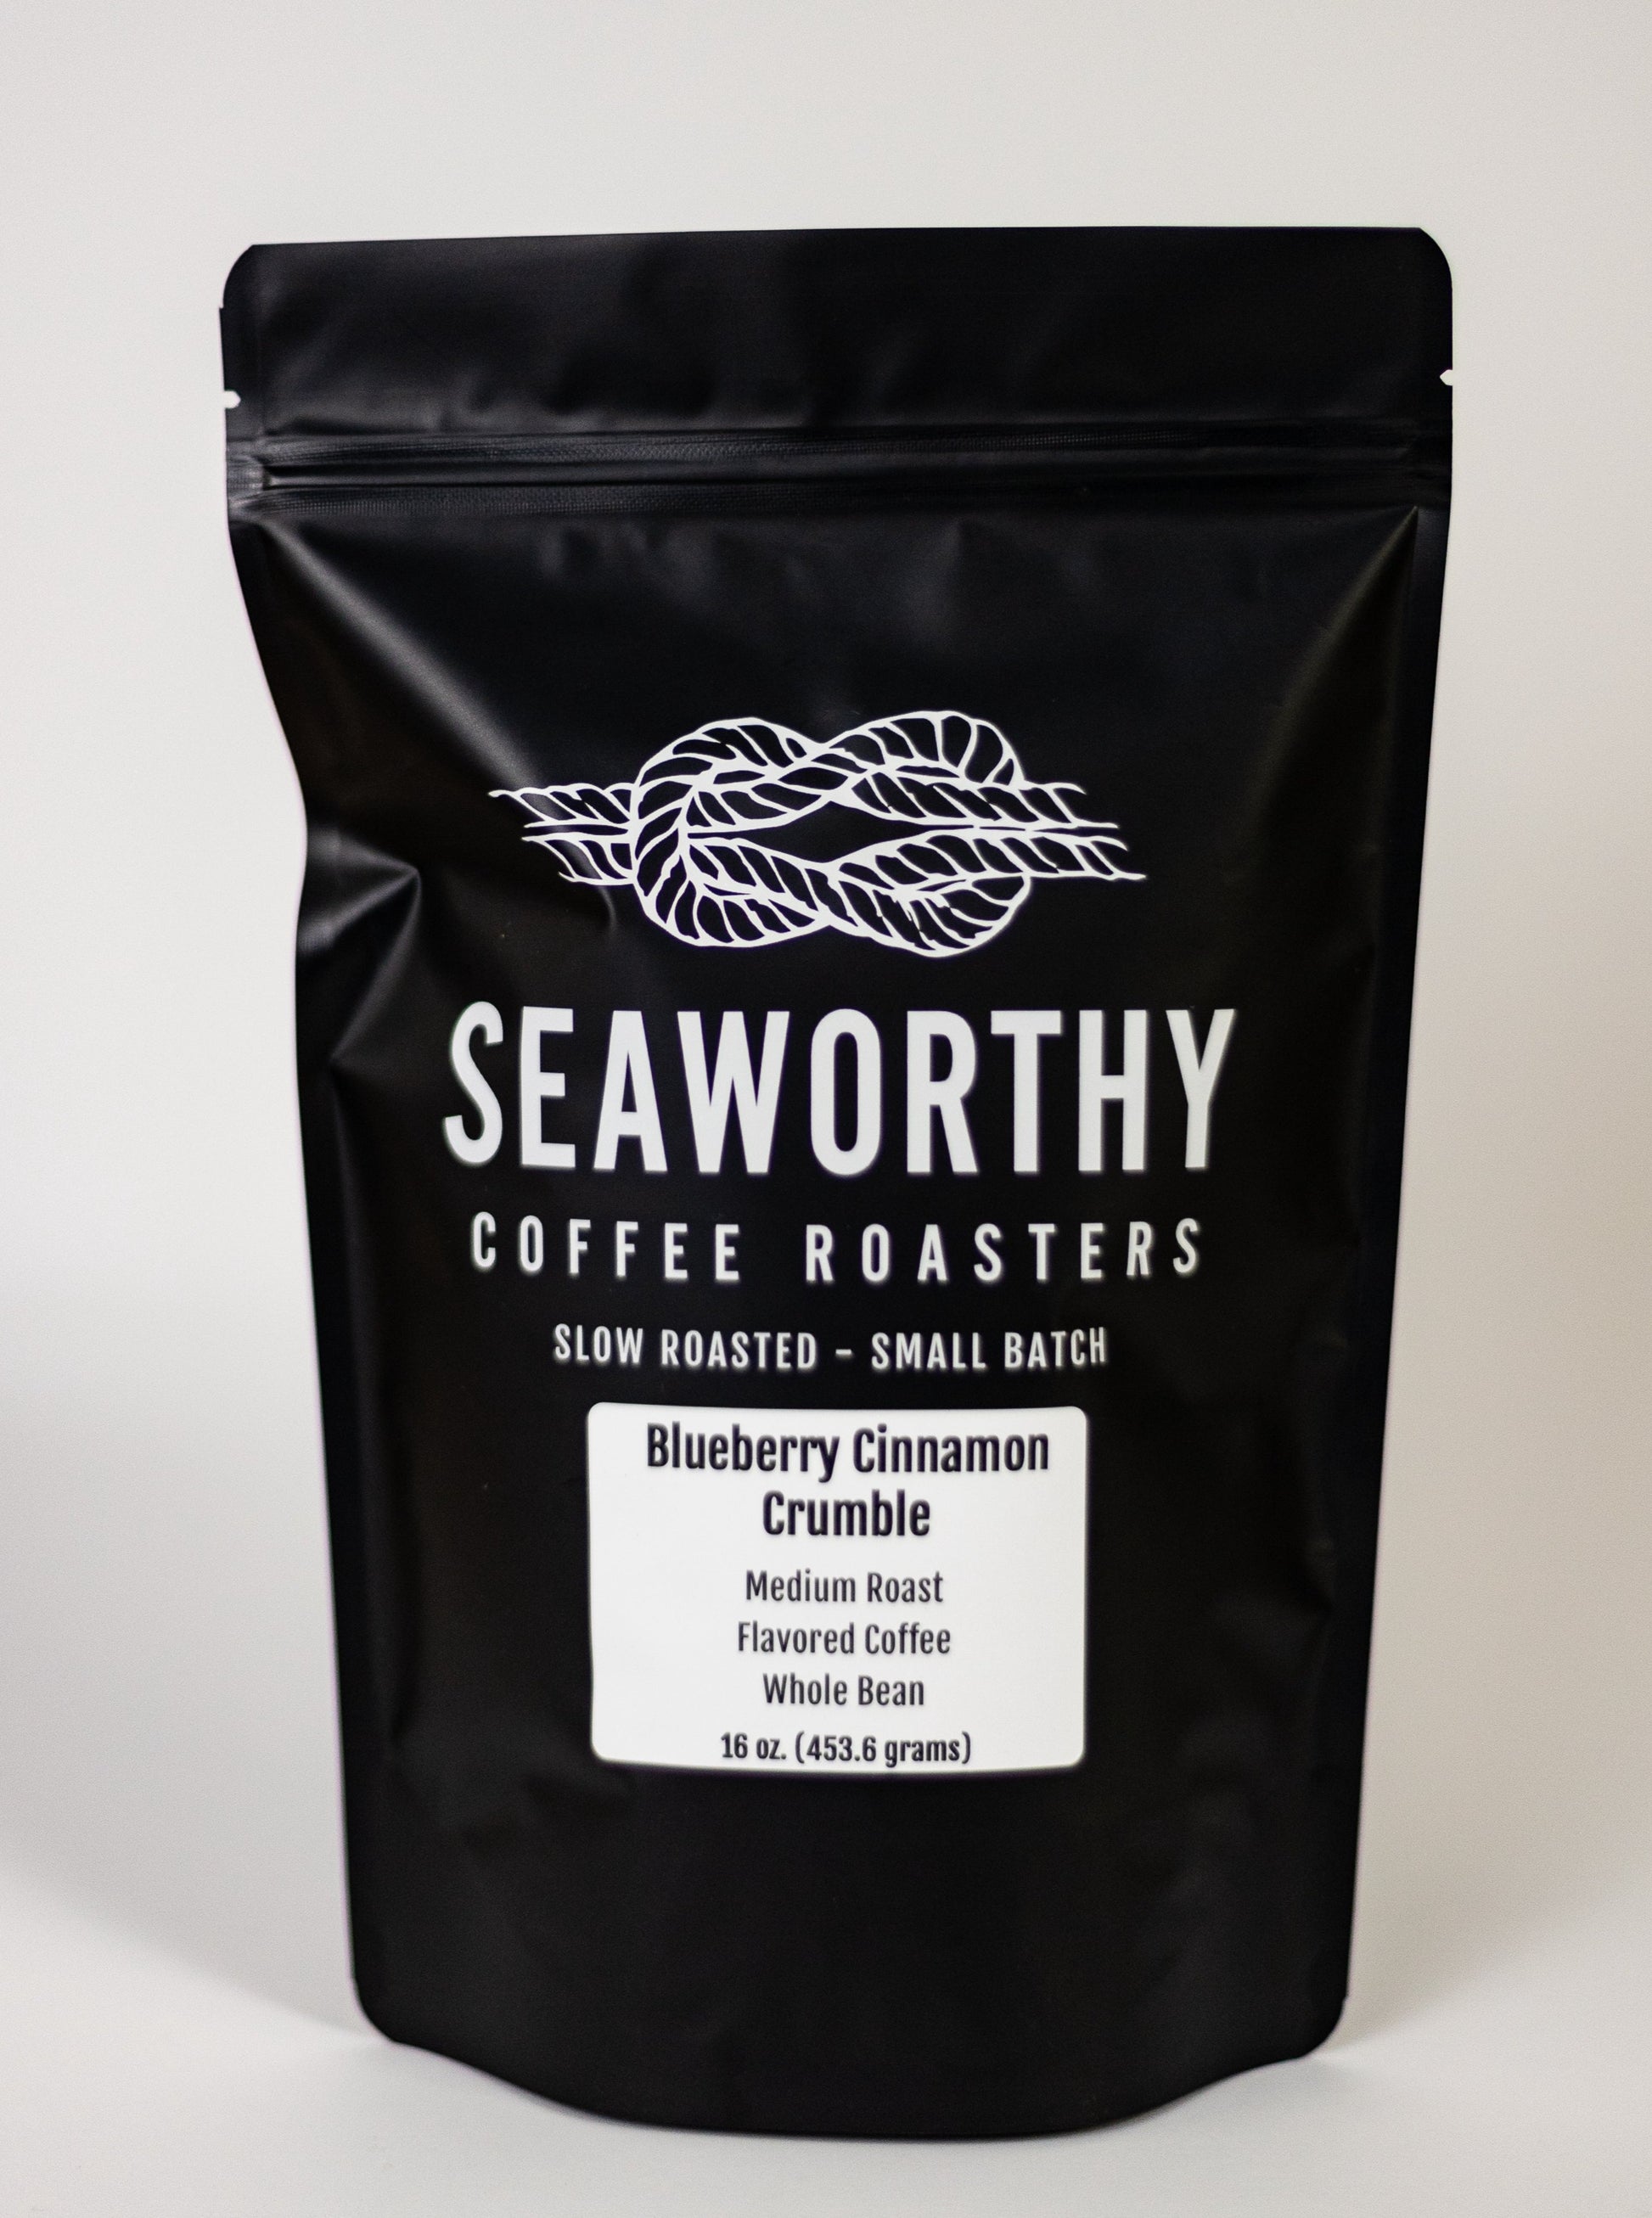 Seaworthy slow roasted, small batch, low acid coffee 1 pound bag of Blueberry Cinnamon Crumble flavored coffee.